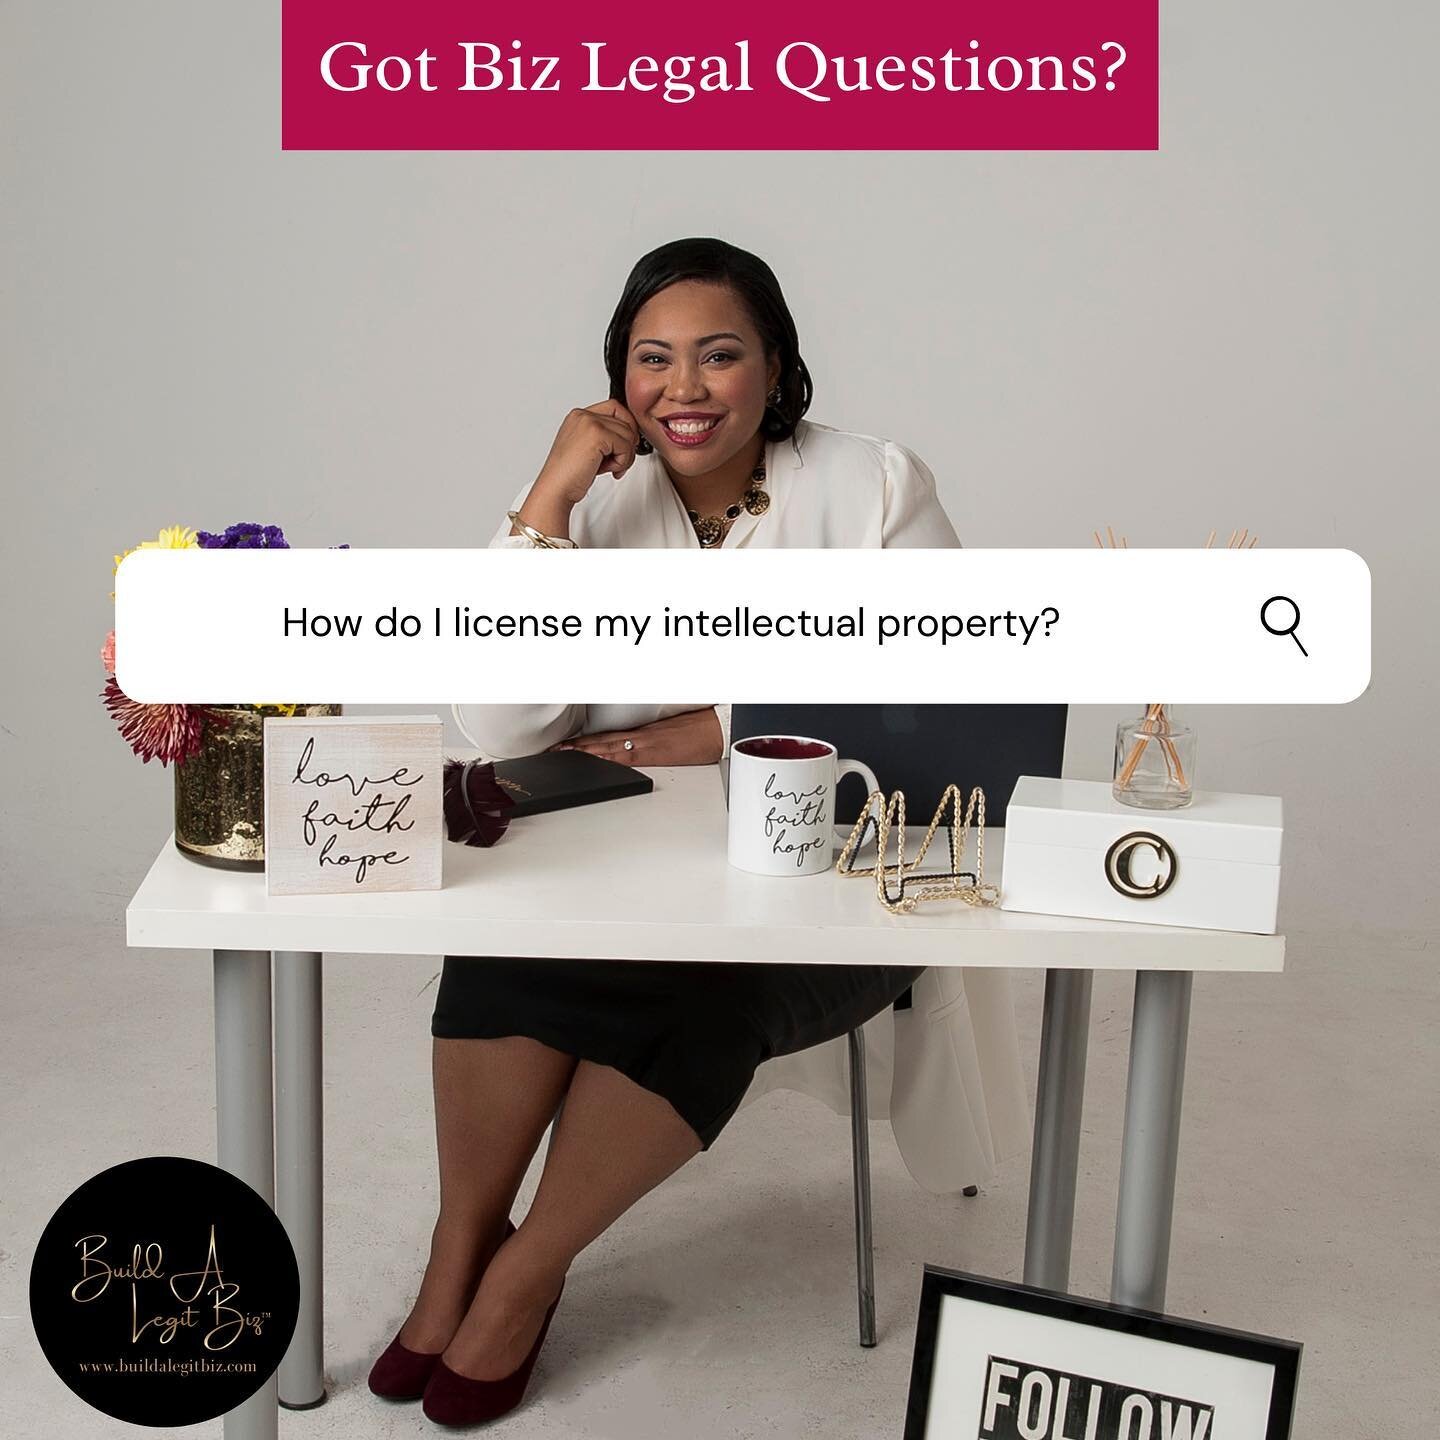 It&rsquo;s Friday!!!! 

Alright, this question popped up during the Influencer Summit. 

Here&rsquo;s my answer:

Invest in a lawyer to draft an intellectual property licensing agreement. You can license your works for others to use and they pay you 